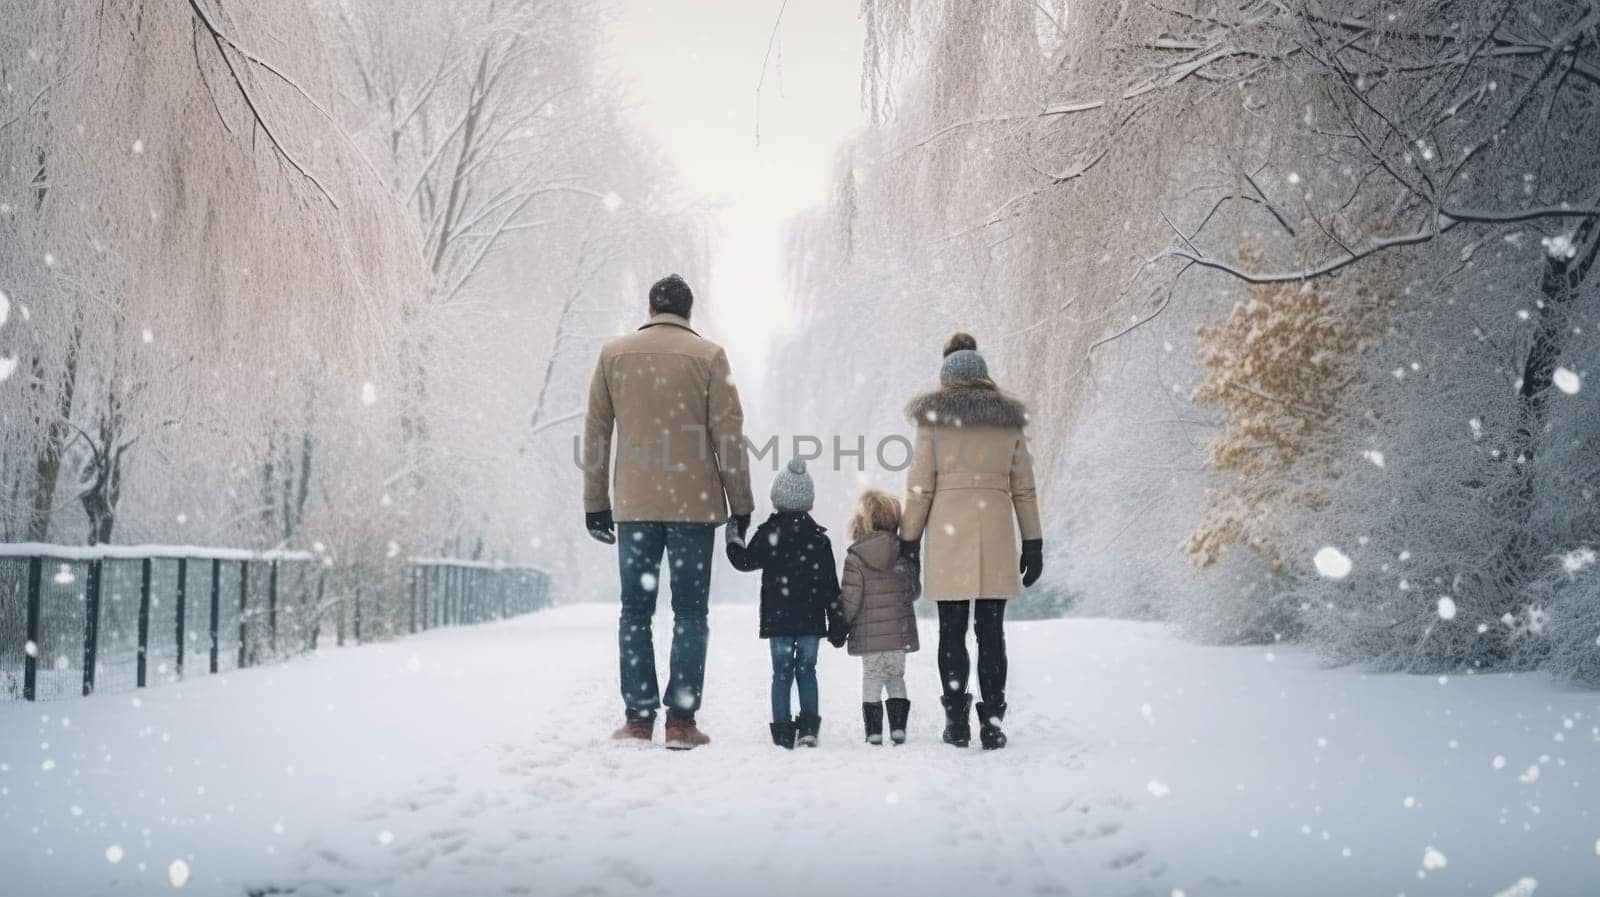 Happy family Father, mother and children are on winter walk in nature comeliness by biancoblue